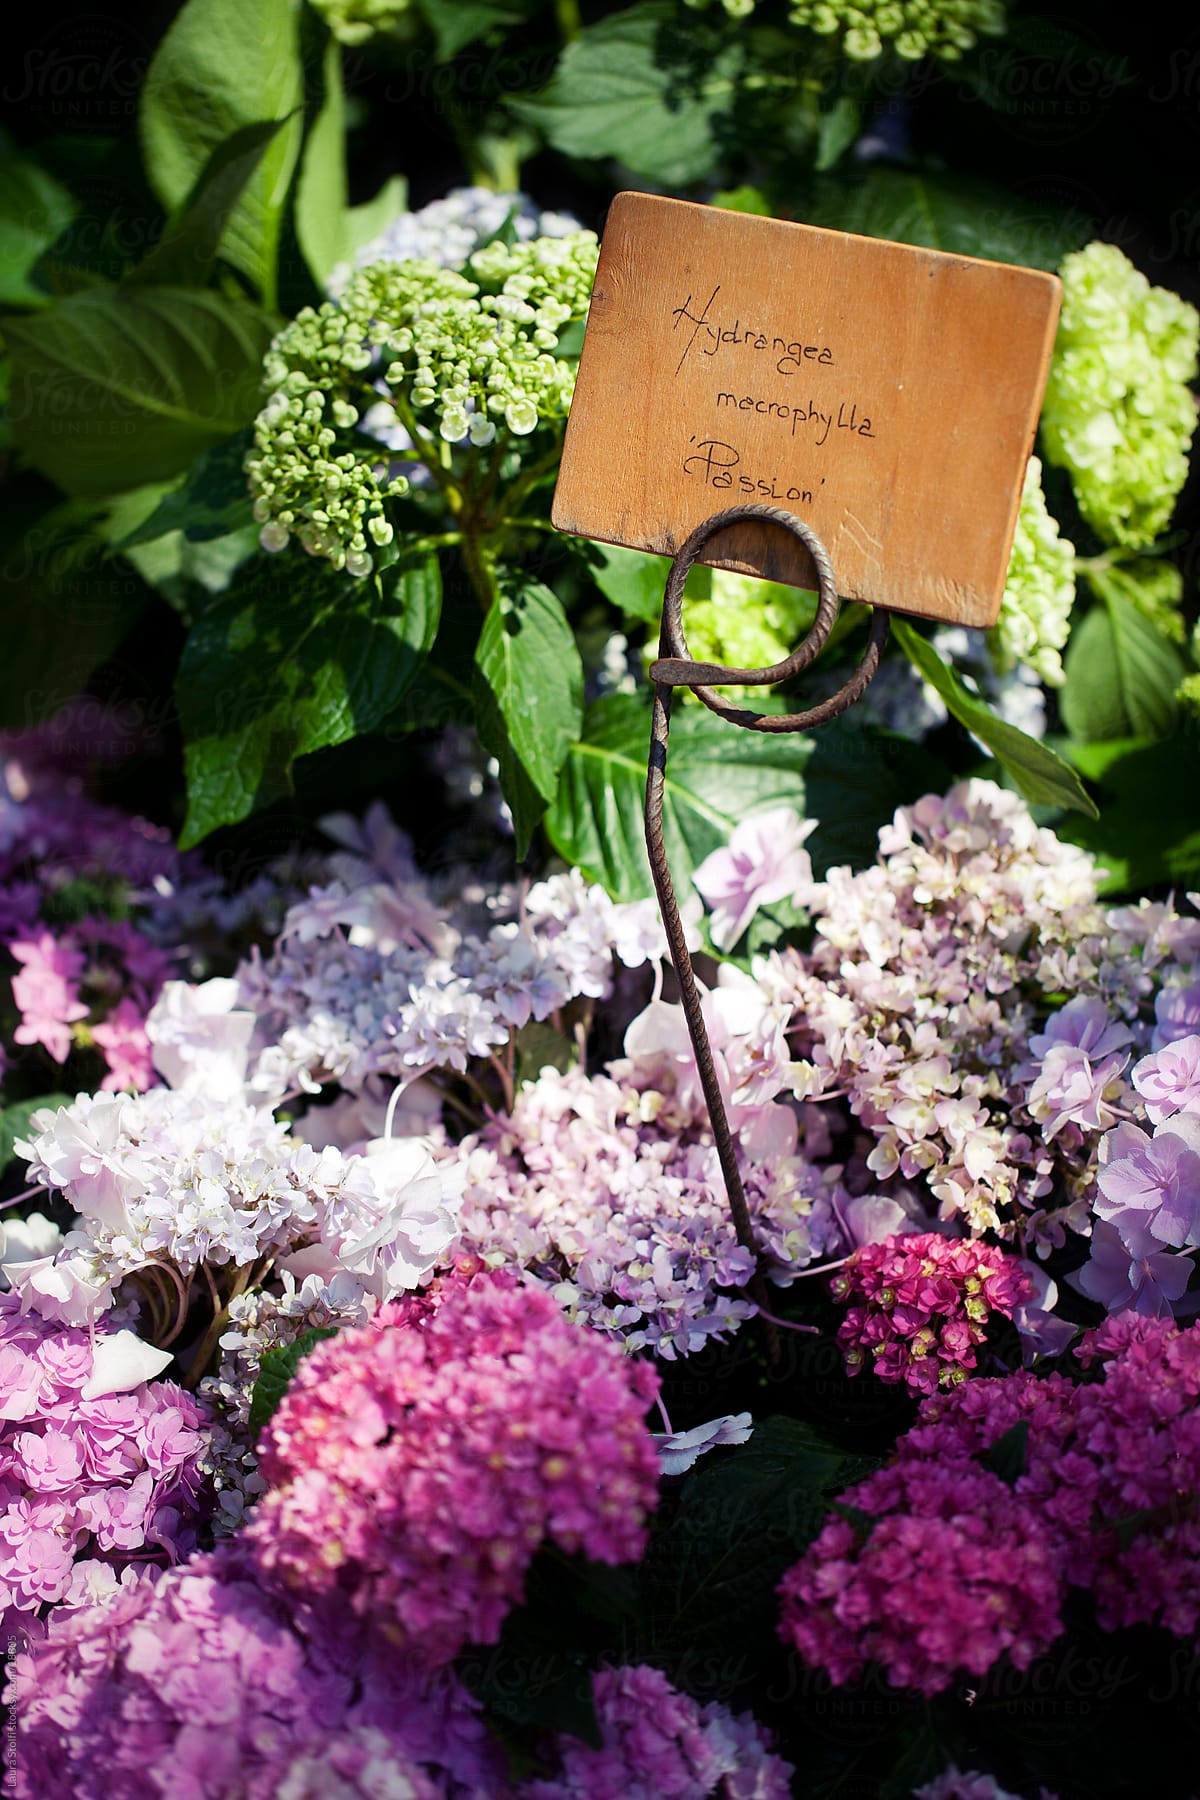 Flowered Hydrangea border with wooden sign amongst flowers